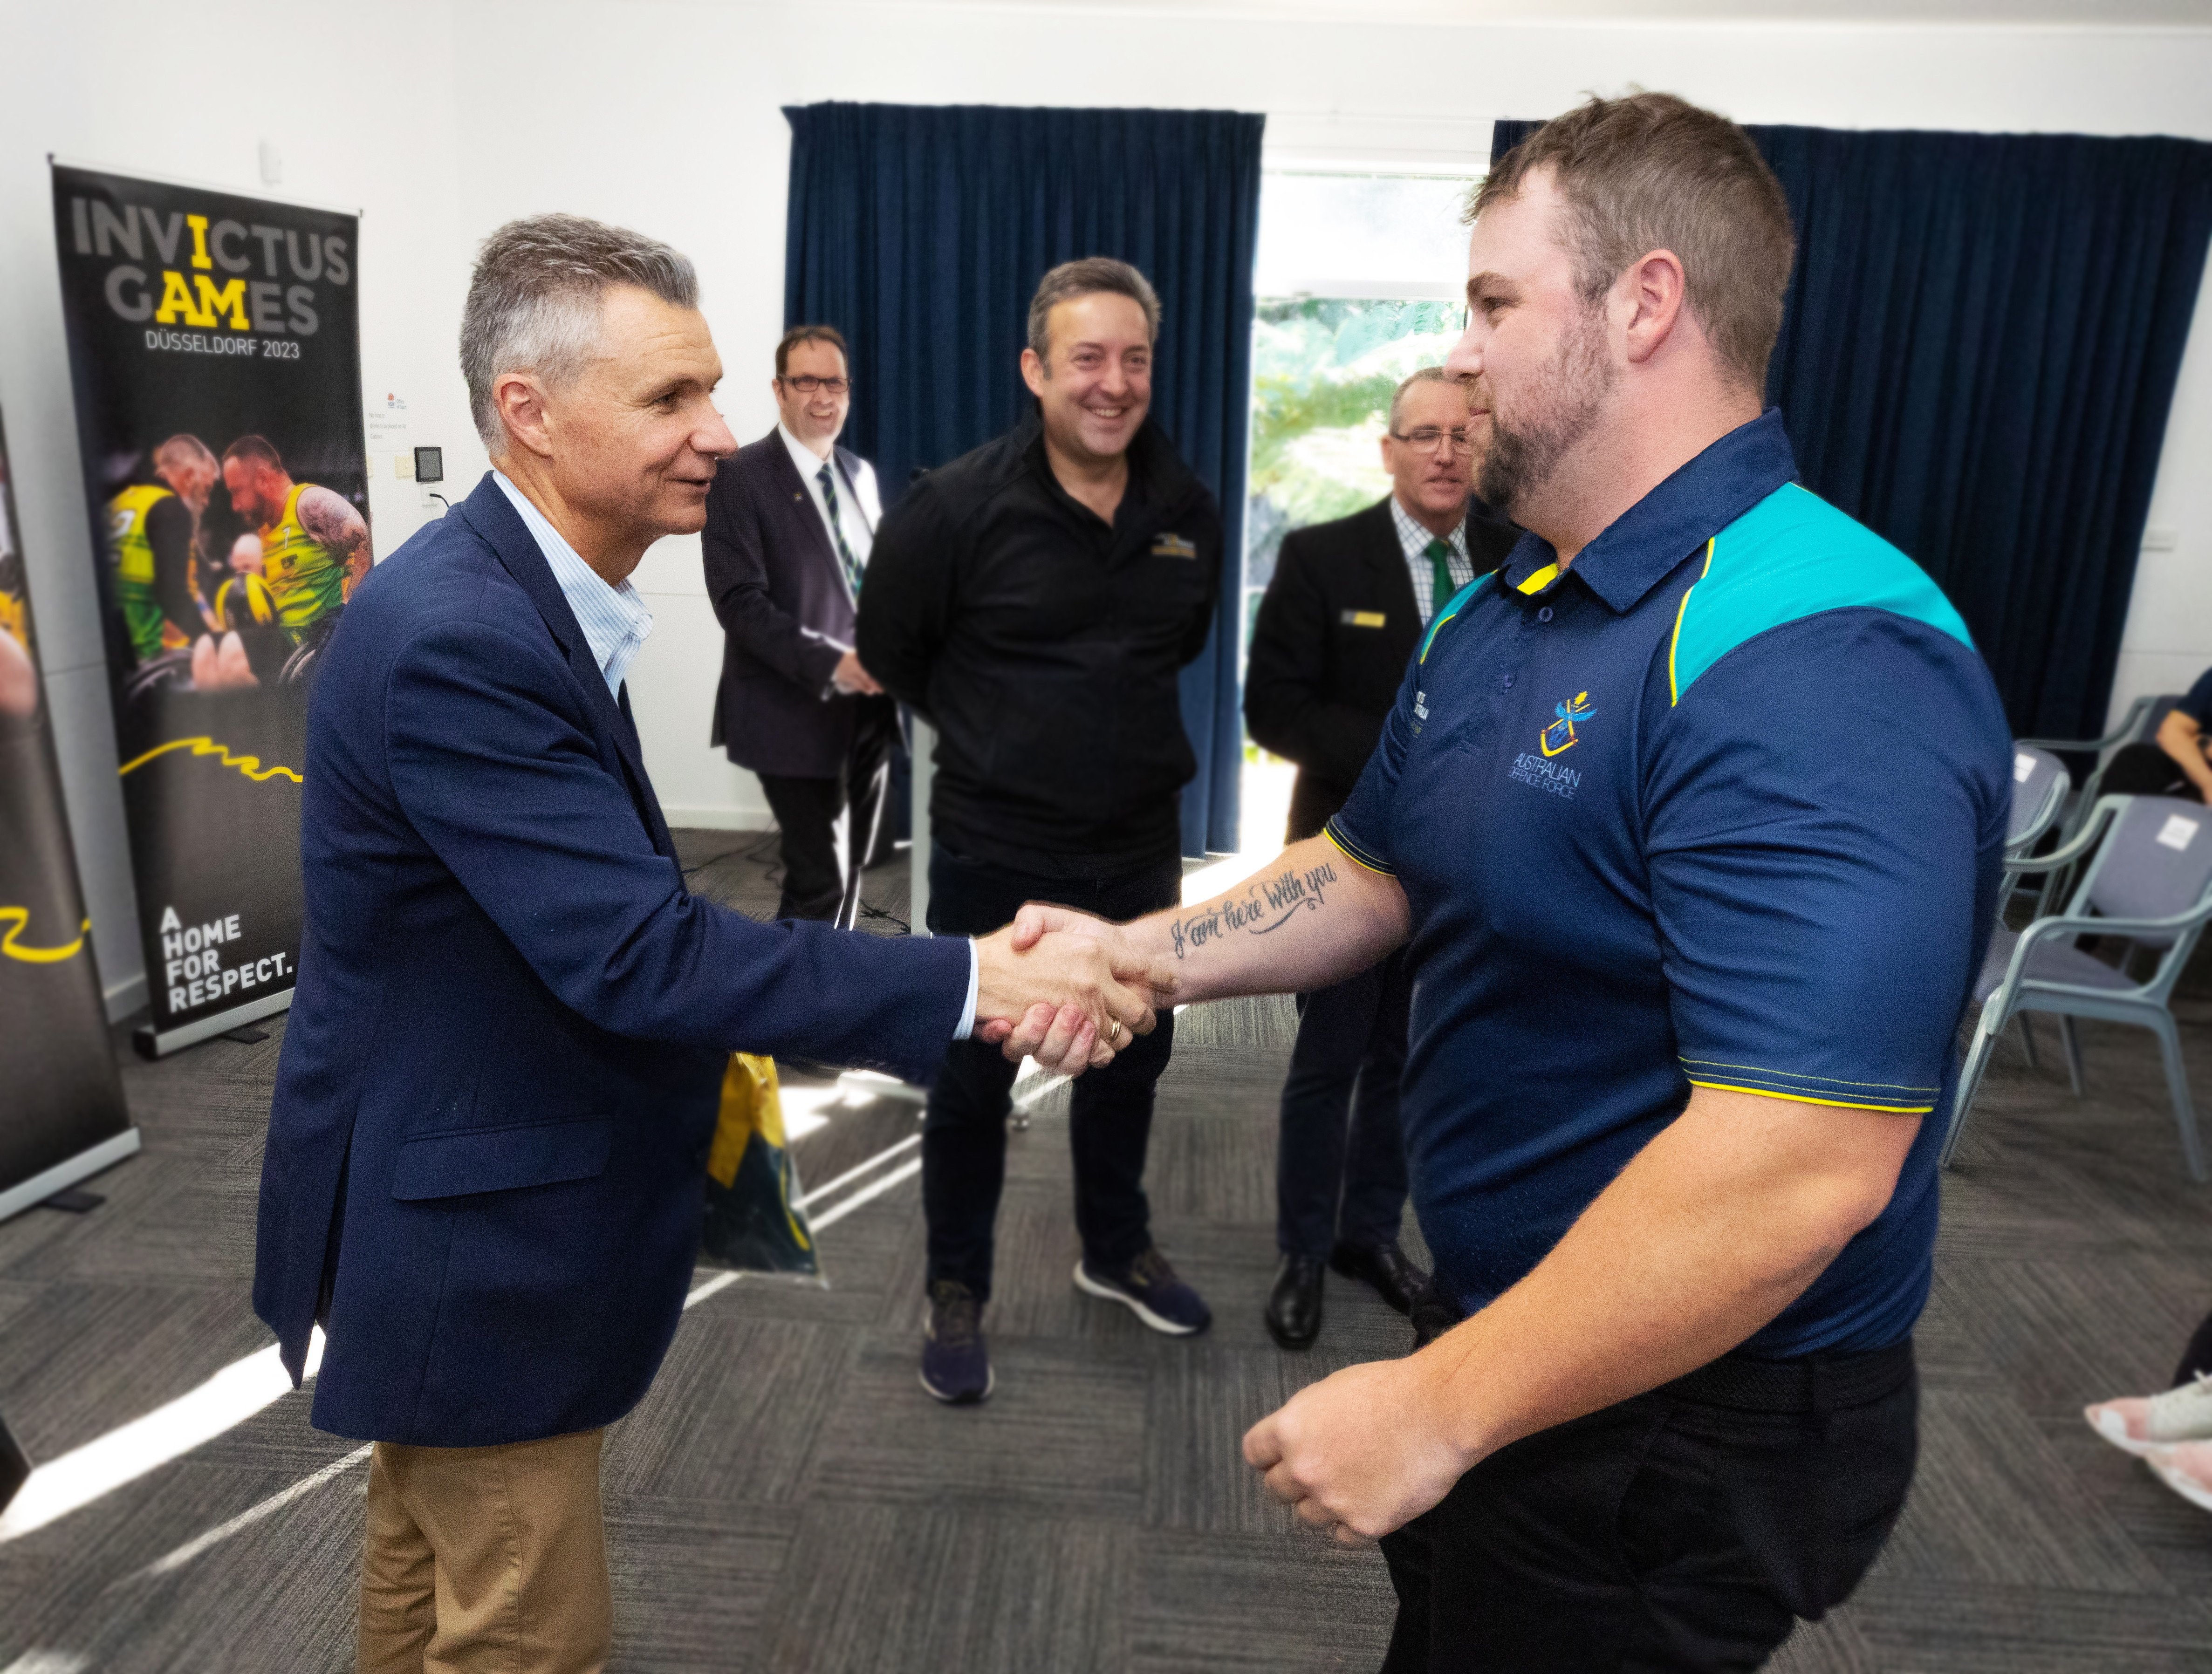 Assistant Minister for Defence, Assistant Minister for Veterans Affairs, Assistant Minister for the Republic, The Honourable Matt Thistlethwaite MP congratulates Team Australia competitor Stephen Lockwood during the announcement of the co-captains of Team Australia for Invictus Games Dusseldorf 2023 at the Sydney Academy of Sports and Recreation, Narabeen, Sydney. *** Local Caption *** Flight Sergeant Nathan King and Able Seaman Taryn Dickens have been announced as the co-captains of Team Australia for Invictus Games Dusseldorf 2023.
